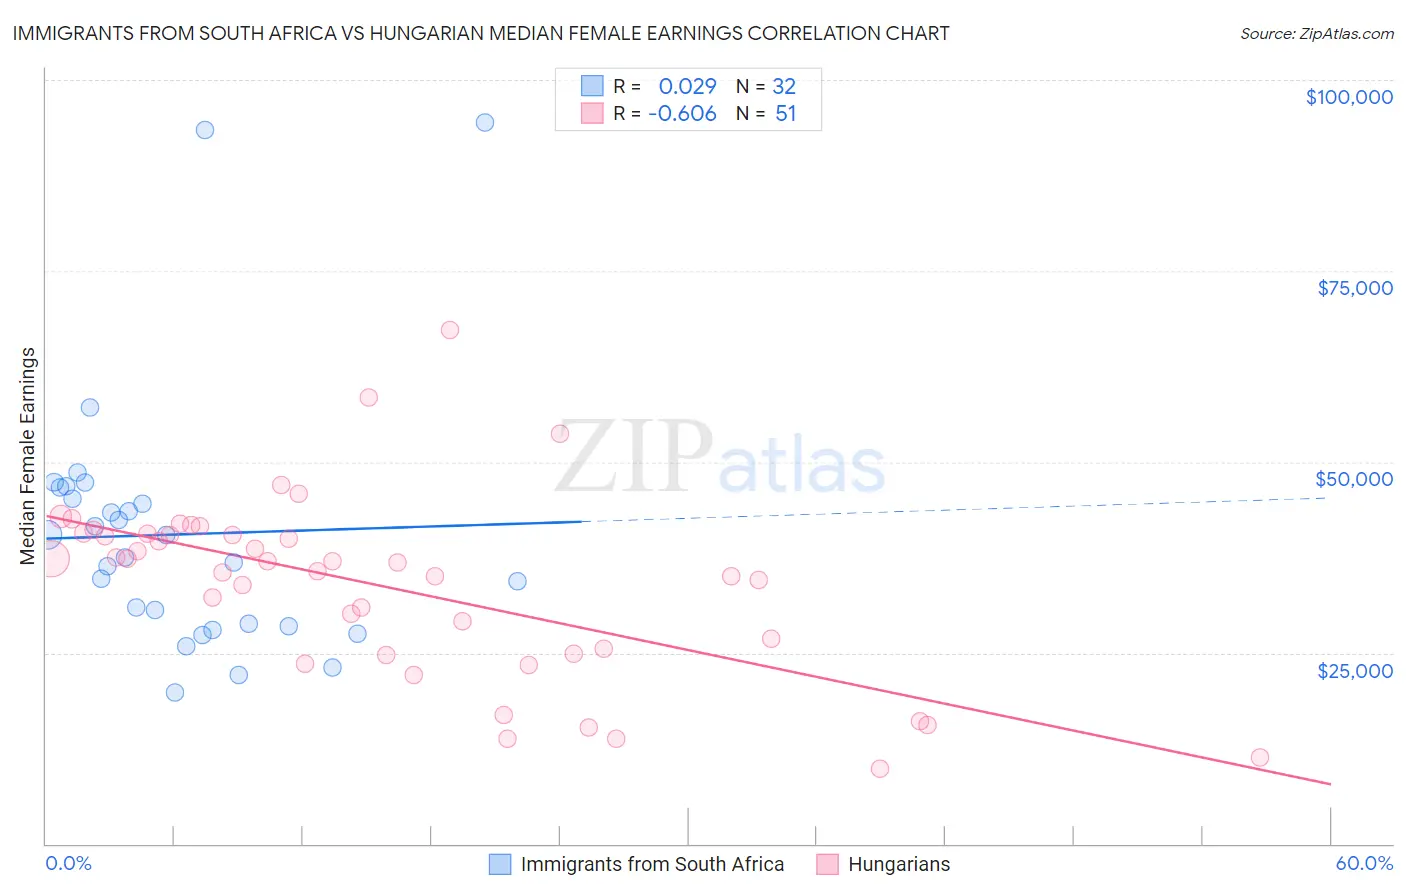 Immigrants from South Africa vs Hungarian Median Female Earnings